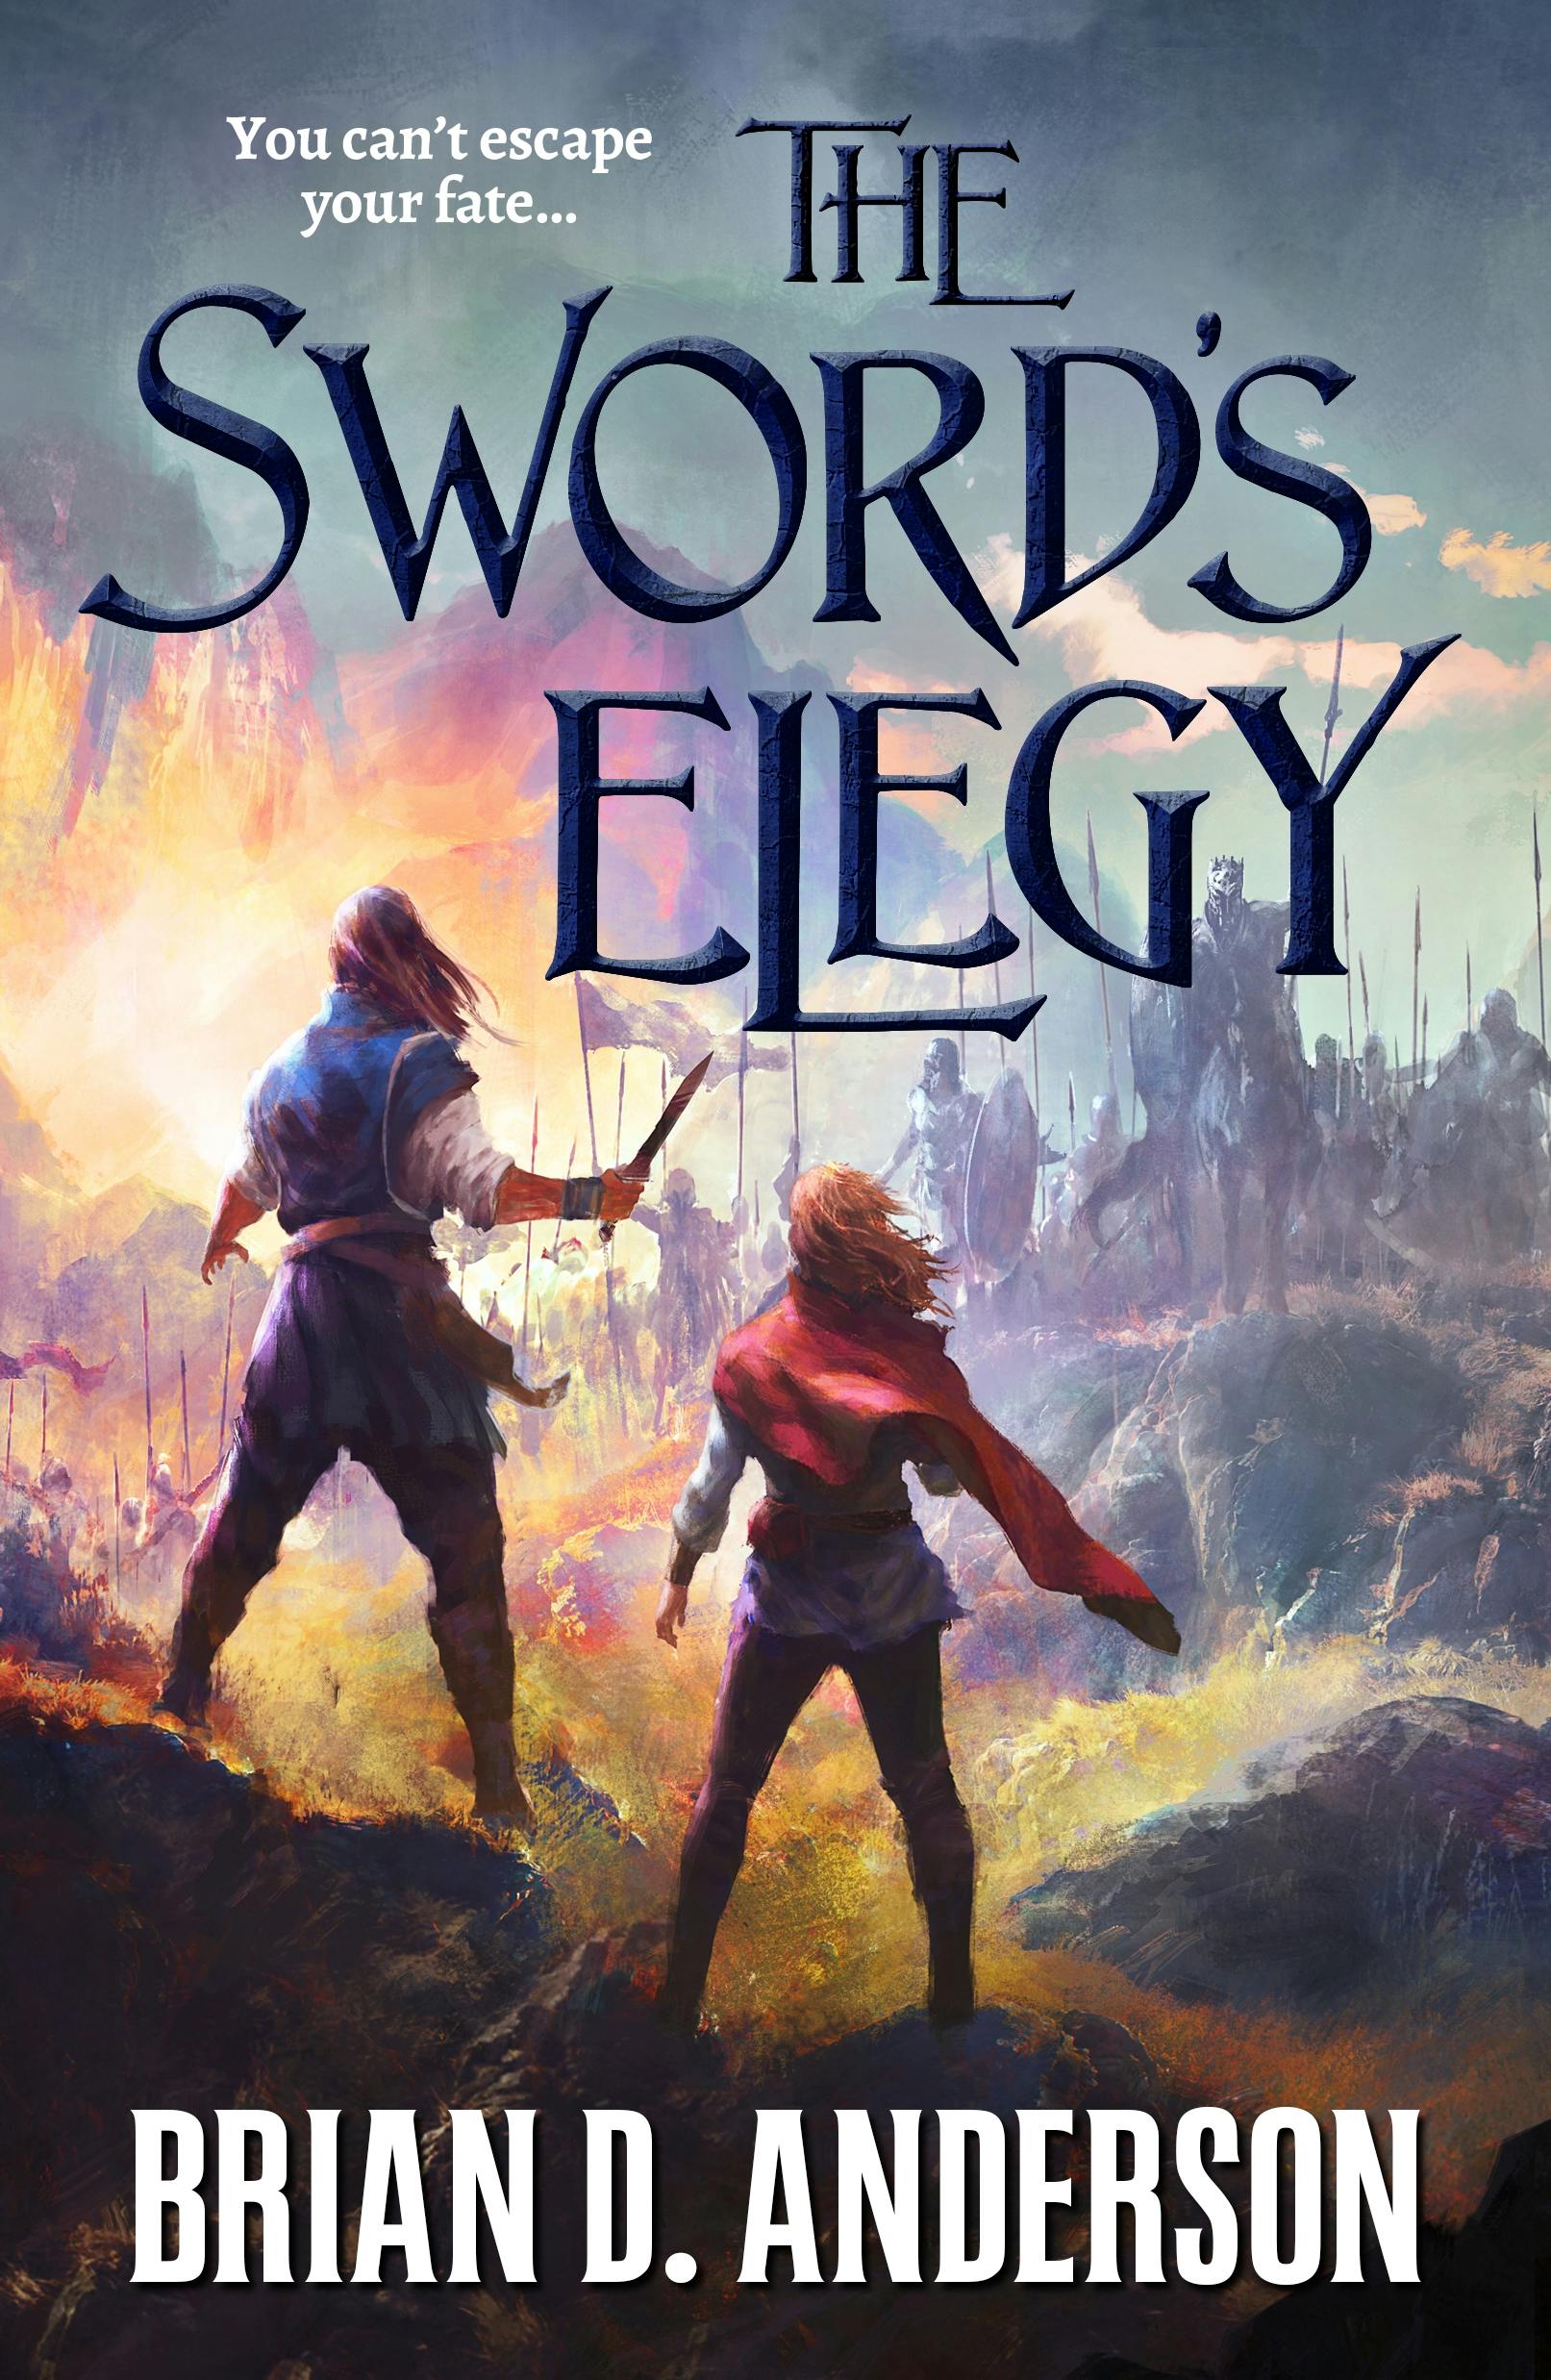 Cover for the book titled as: The Sword's Elegy